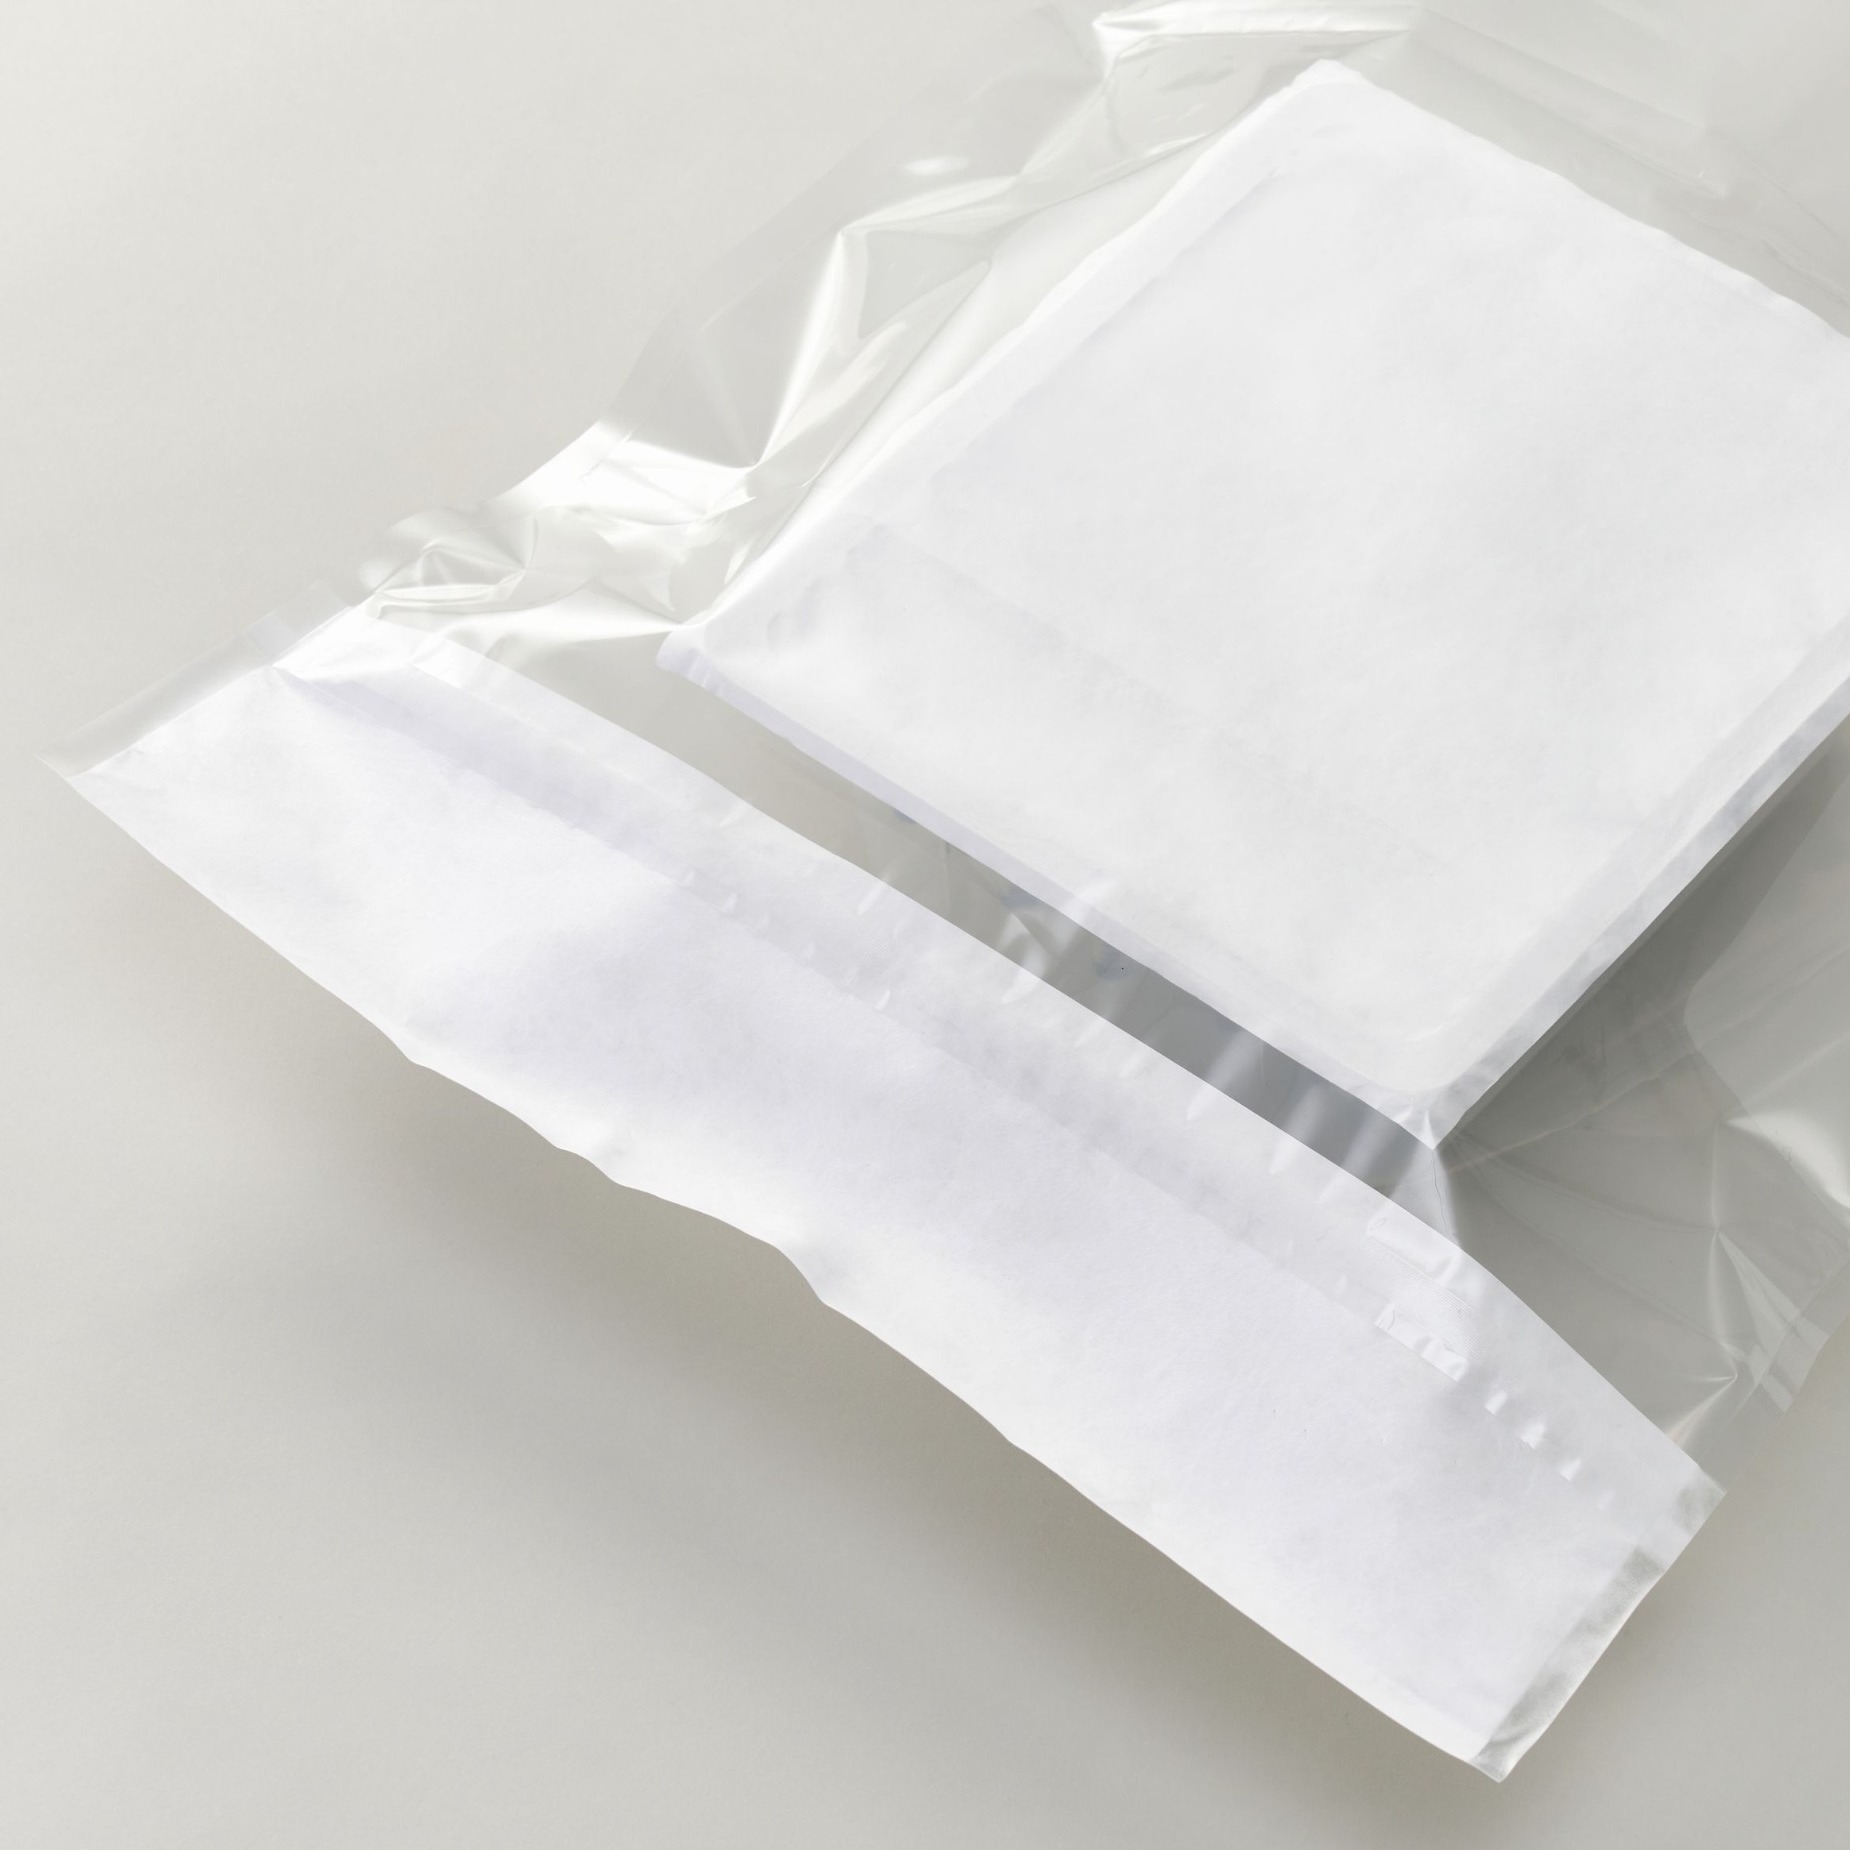 High Clean Nested Prefilled Syringe's Packaging